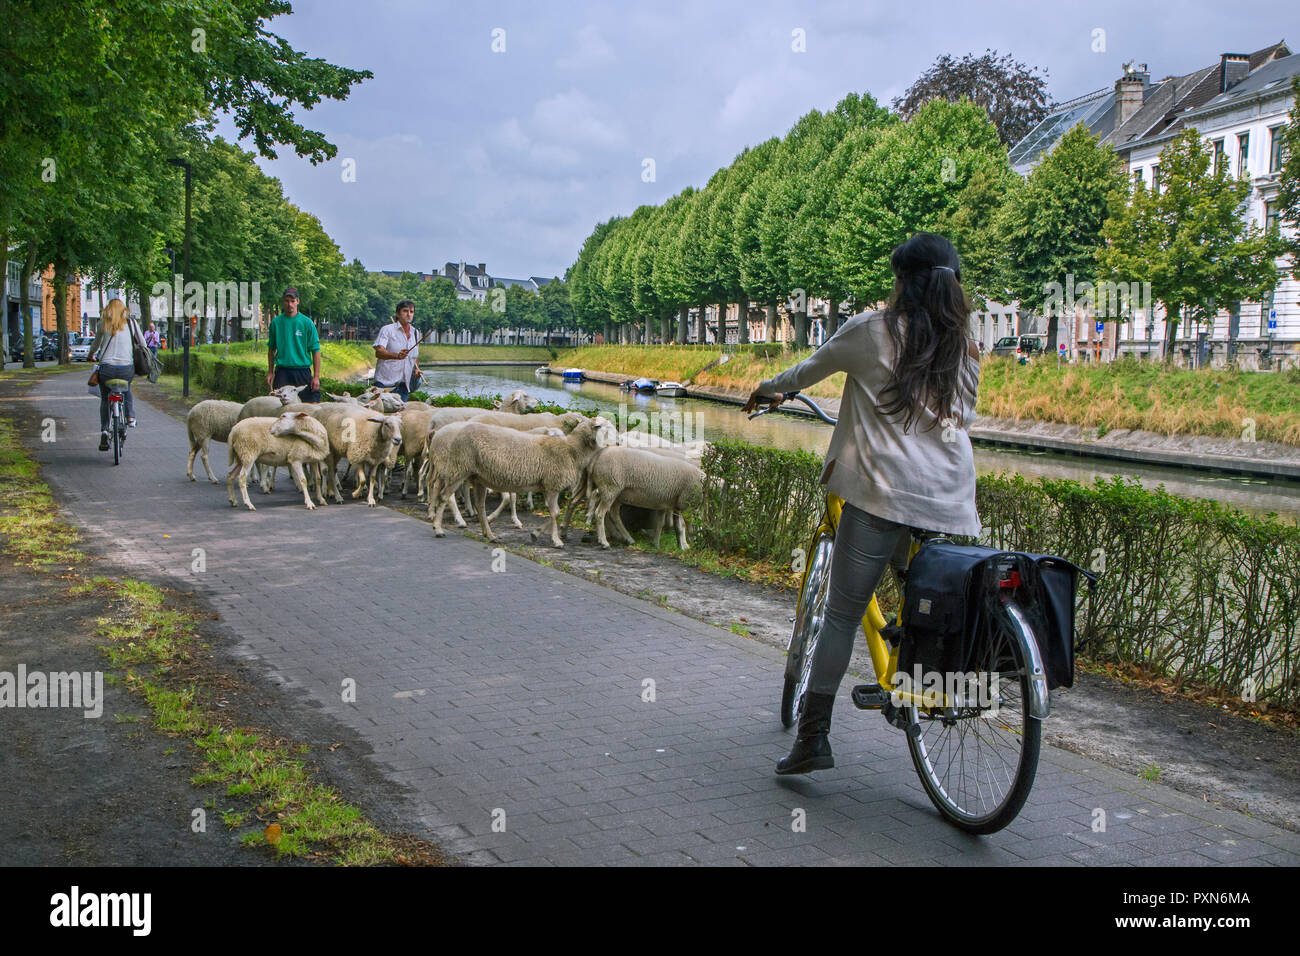 Cyclist stopping on cycle path for shepherd herding flock of sheep along street grazing grass from canal bank in the city Ghent, Flanders, Belgium Stock Photo